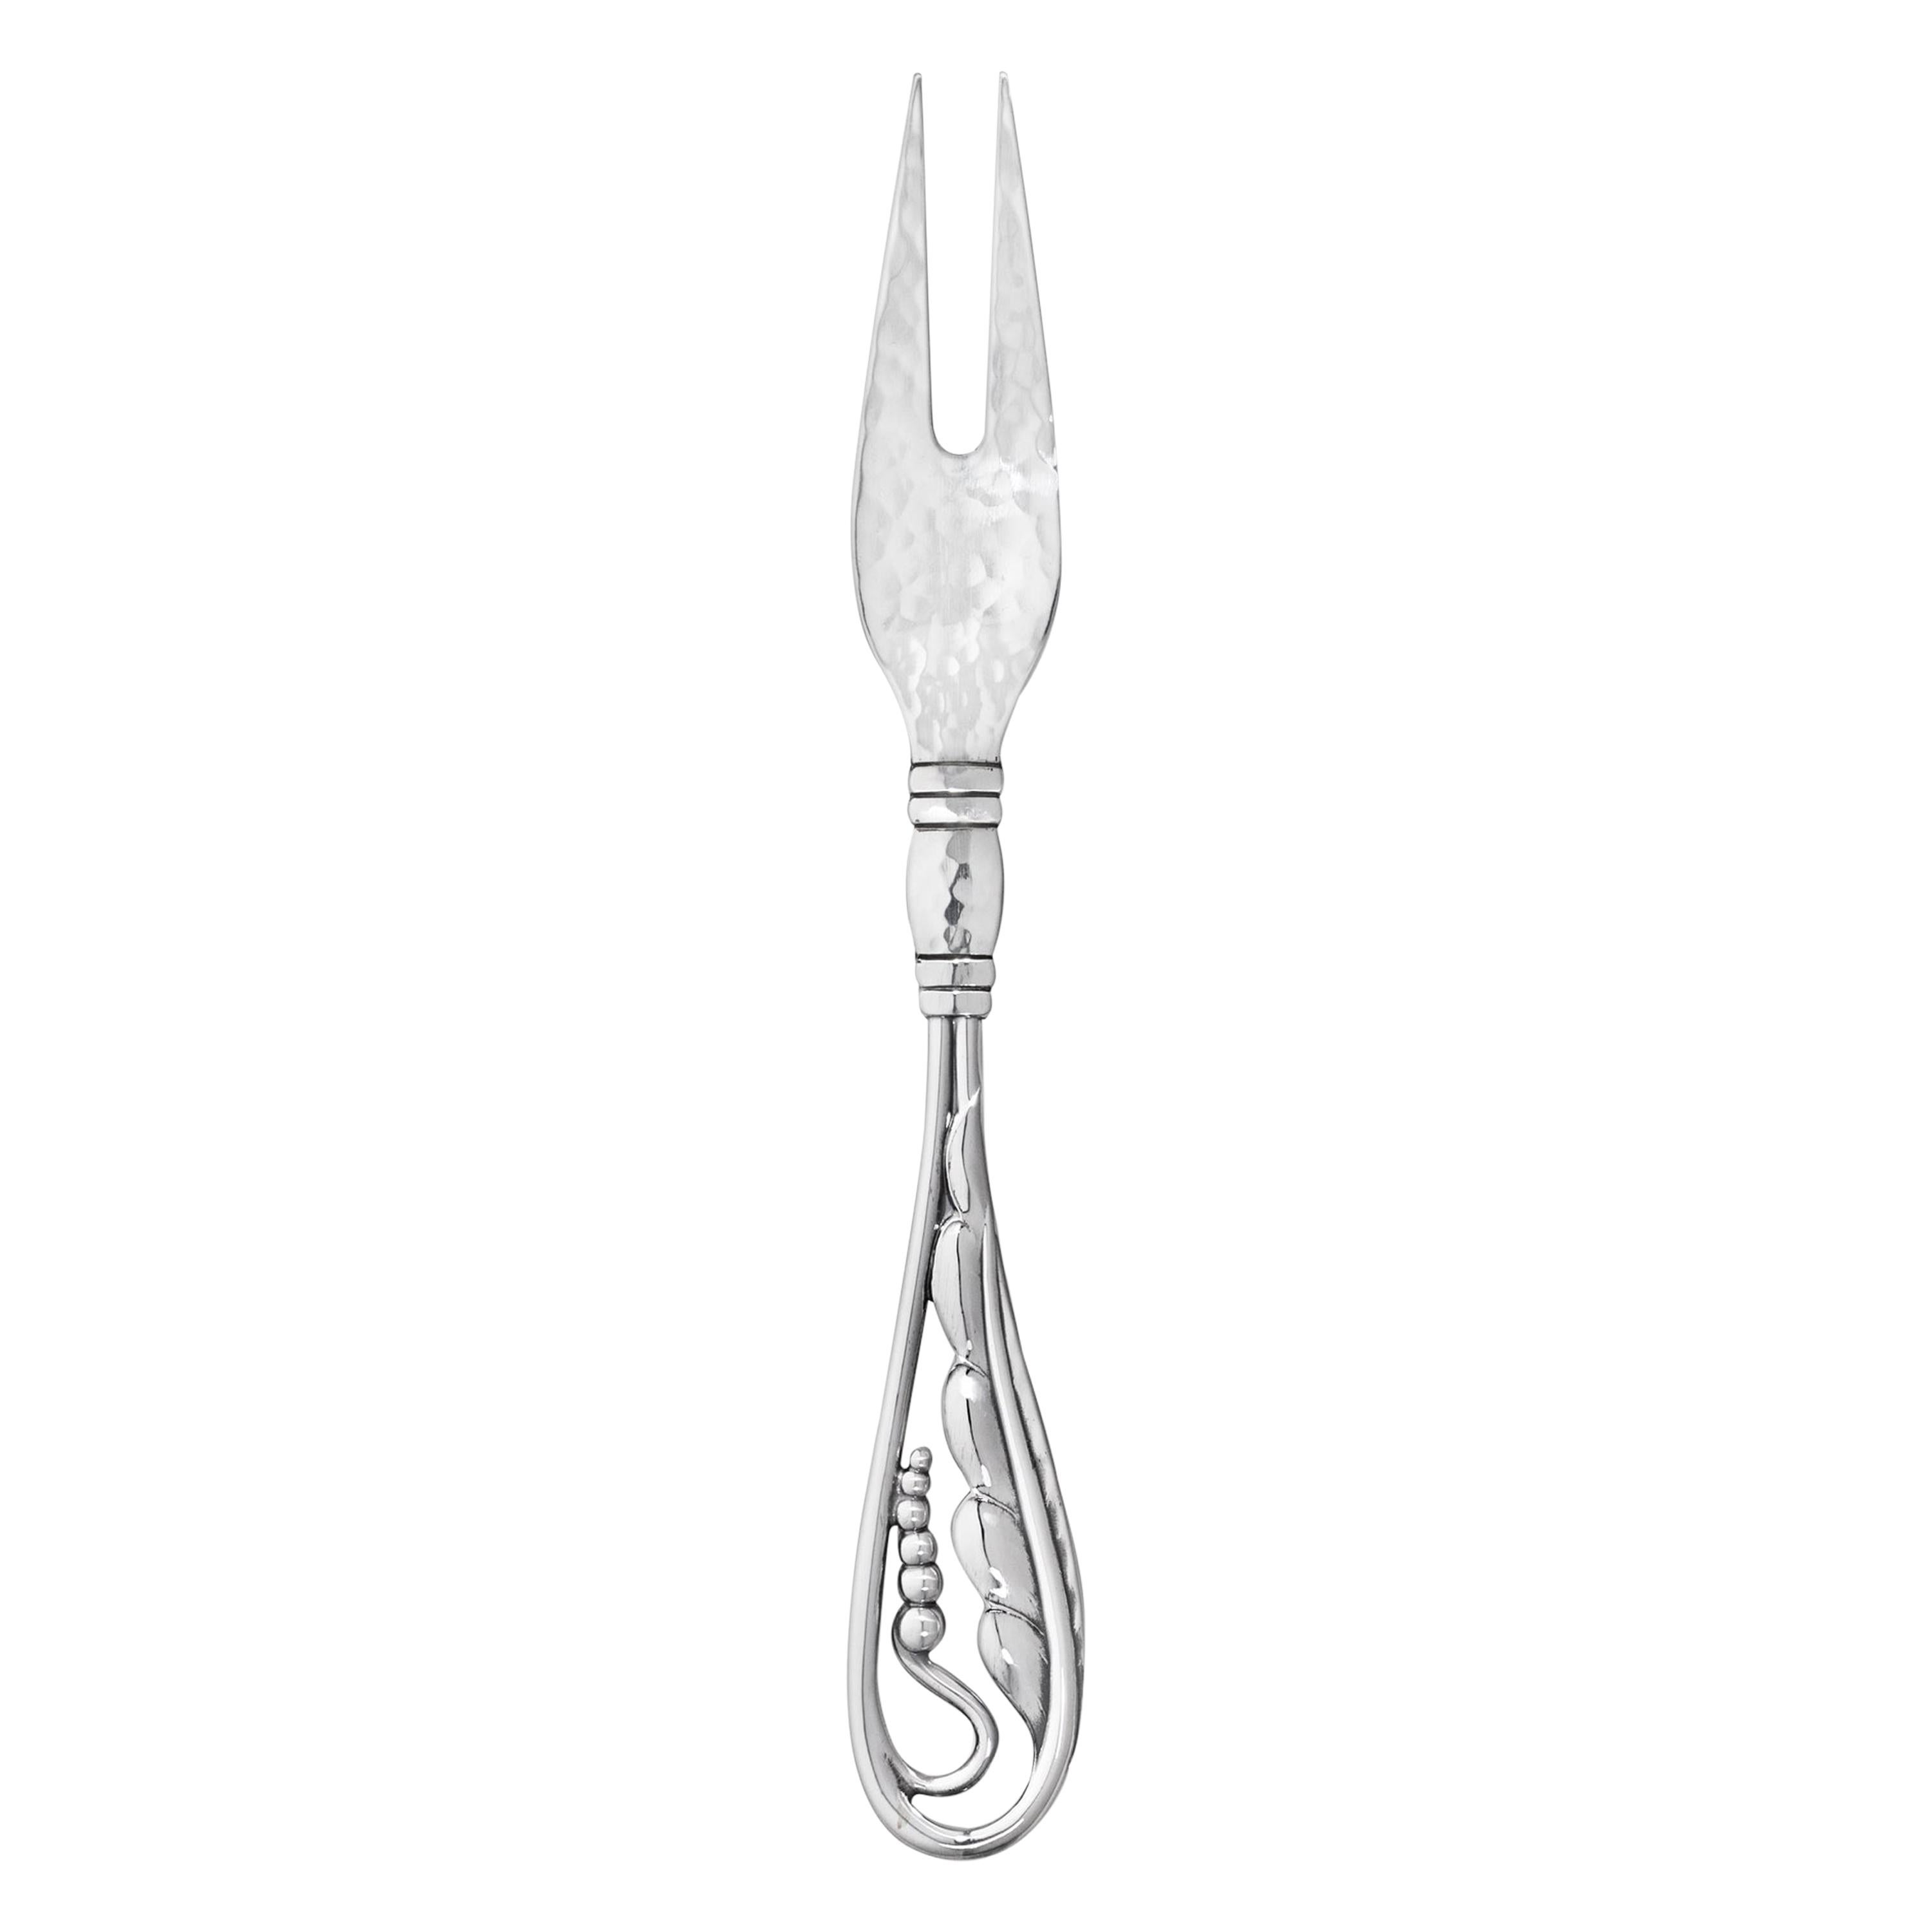 Georg Jensen Handcrafted Sterling Silver Ornamental No. 42 Cold Cut Fork